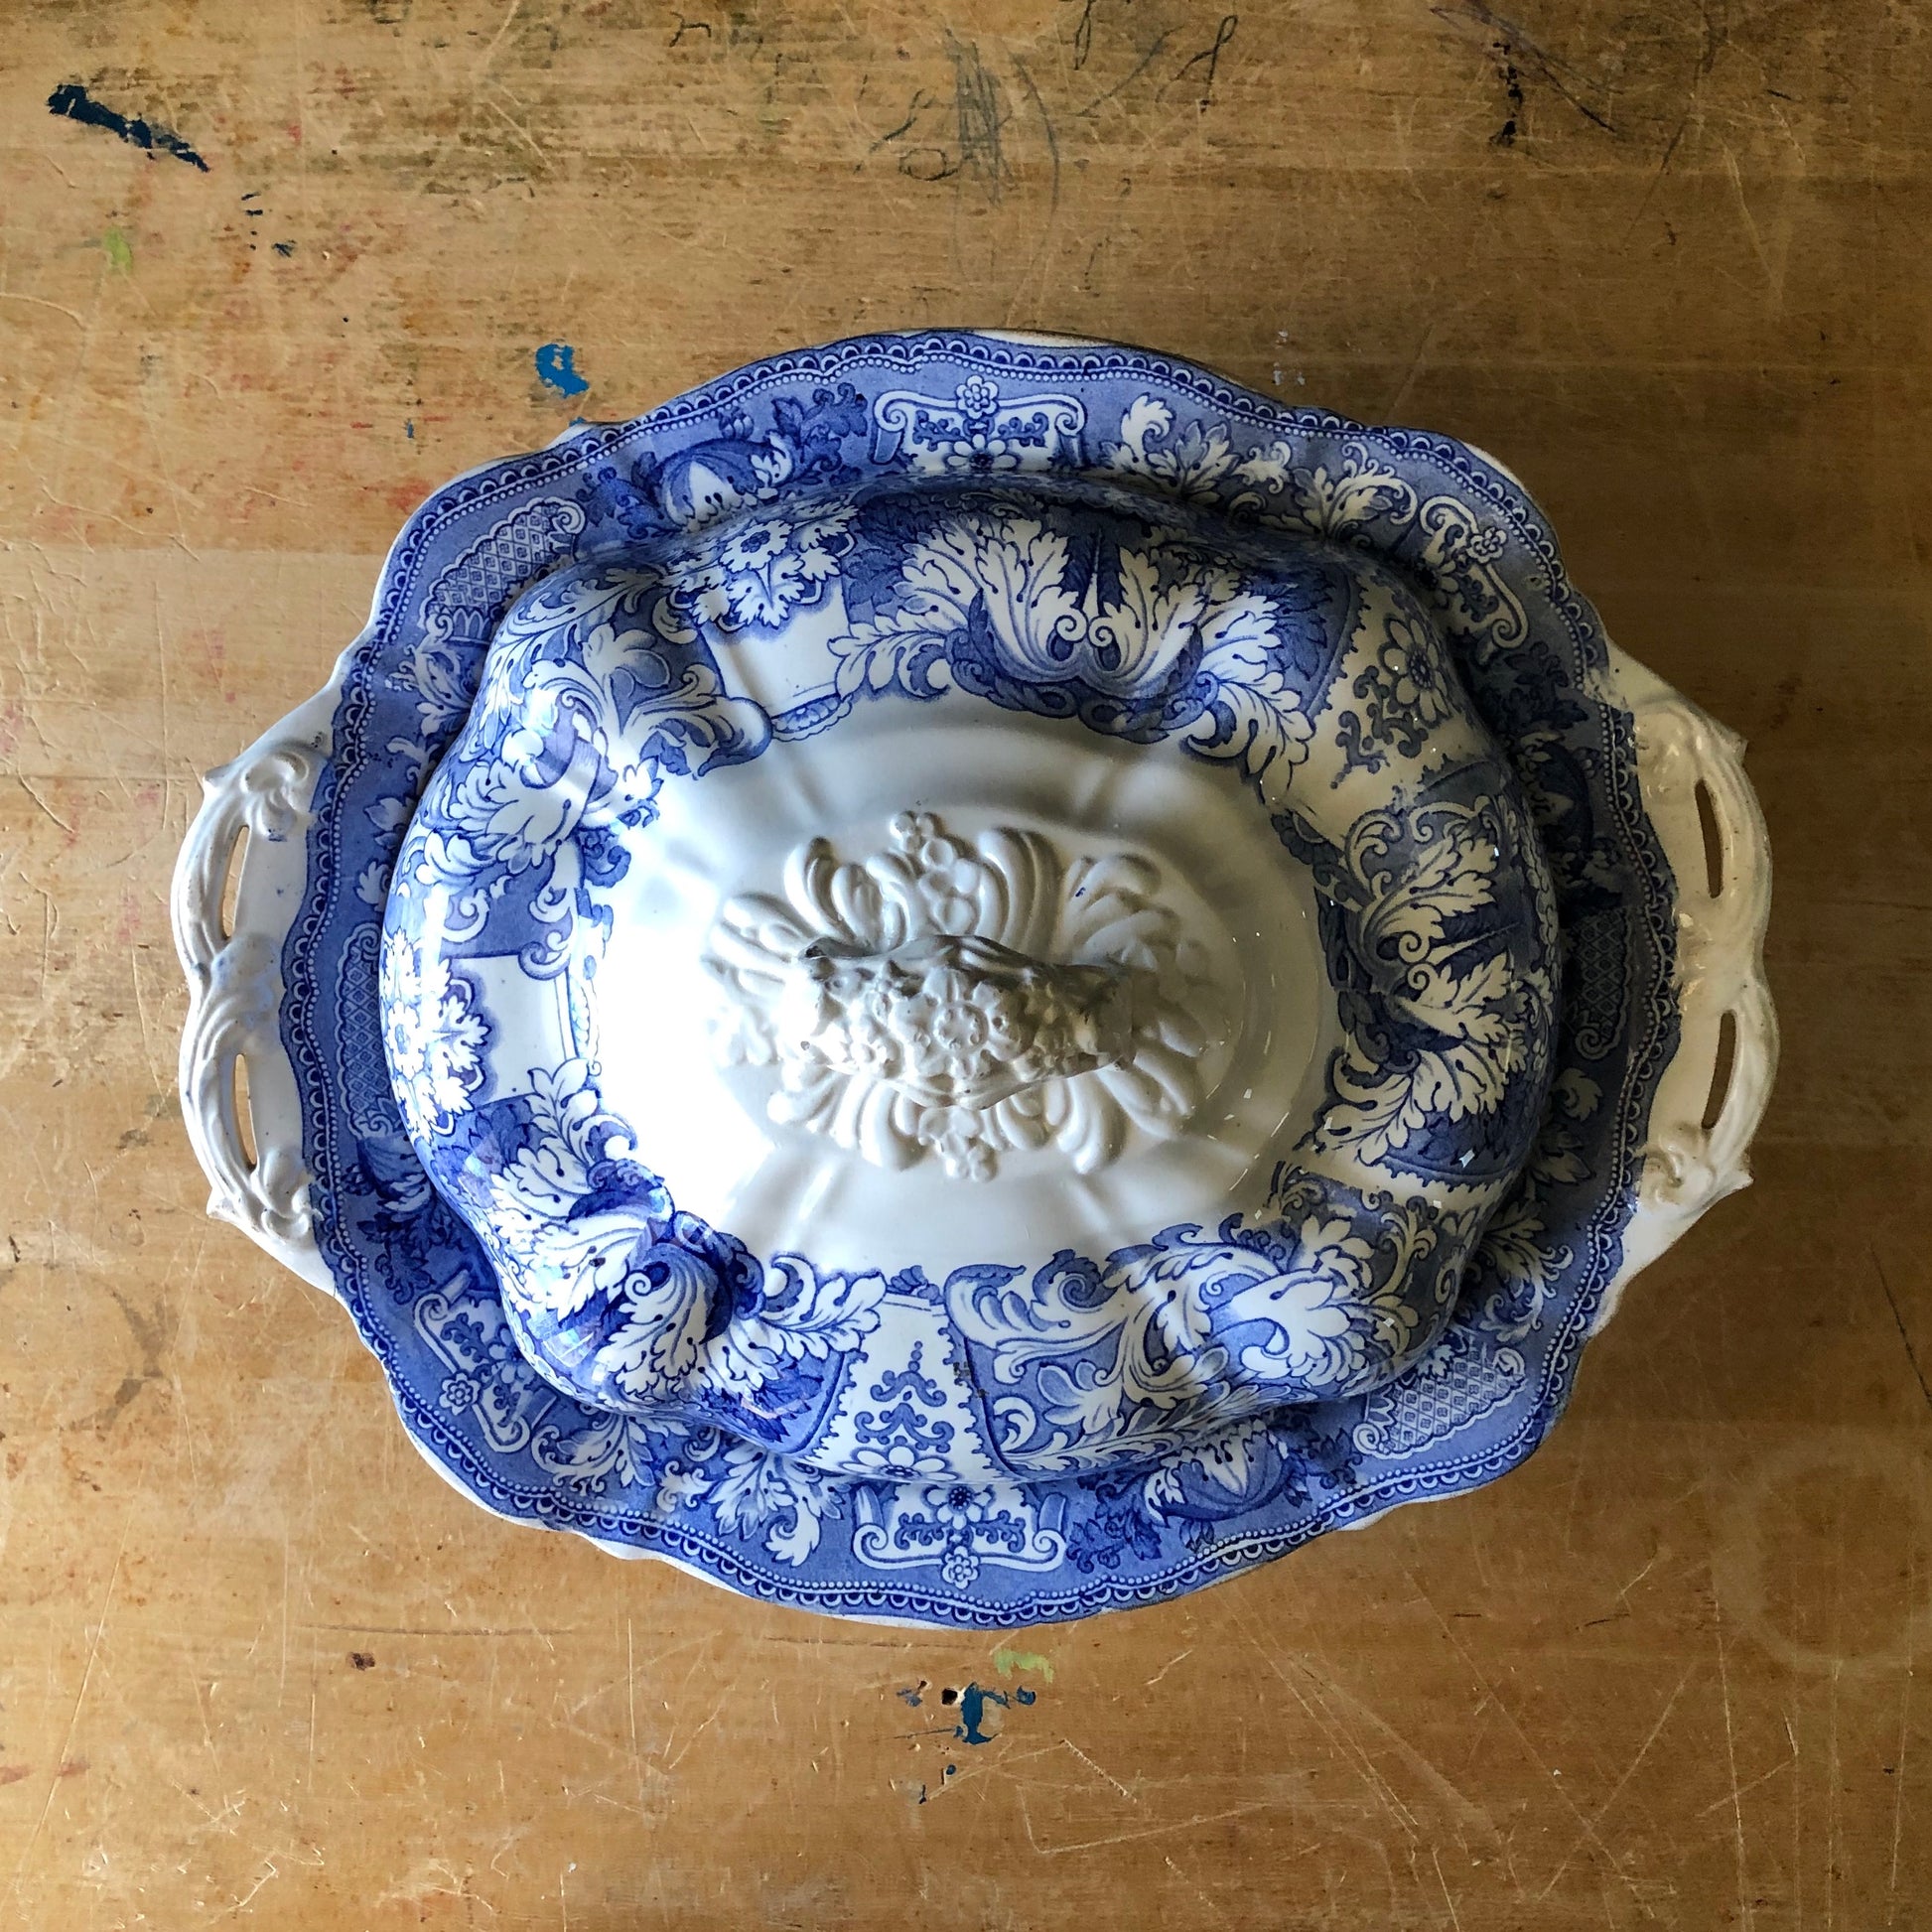 Antique Blue Transferware Covered Serving Dish (1800s)